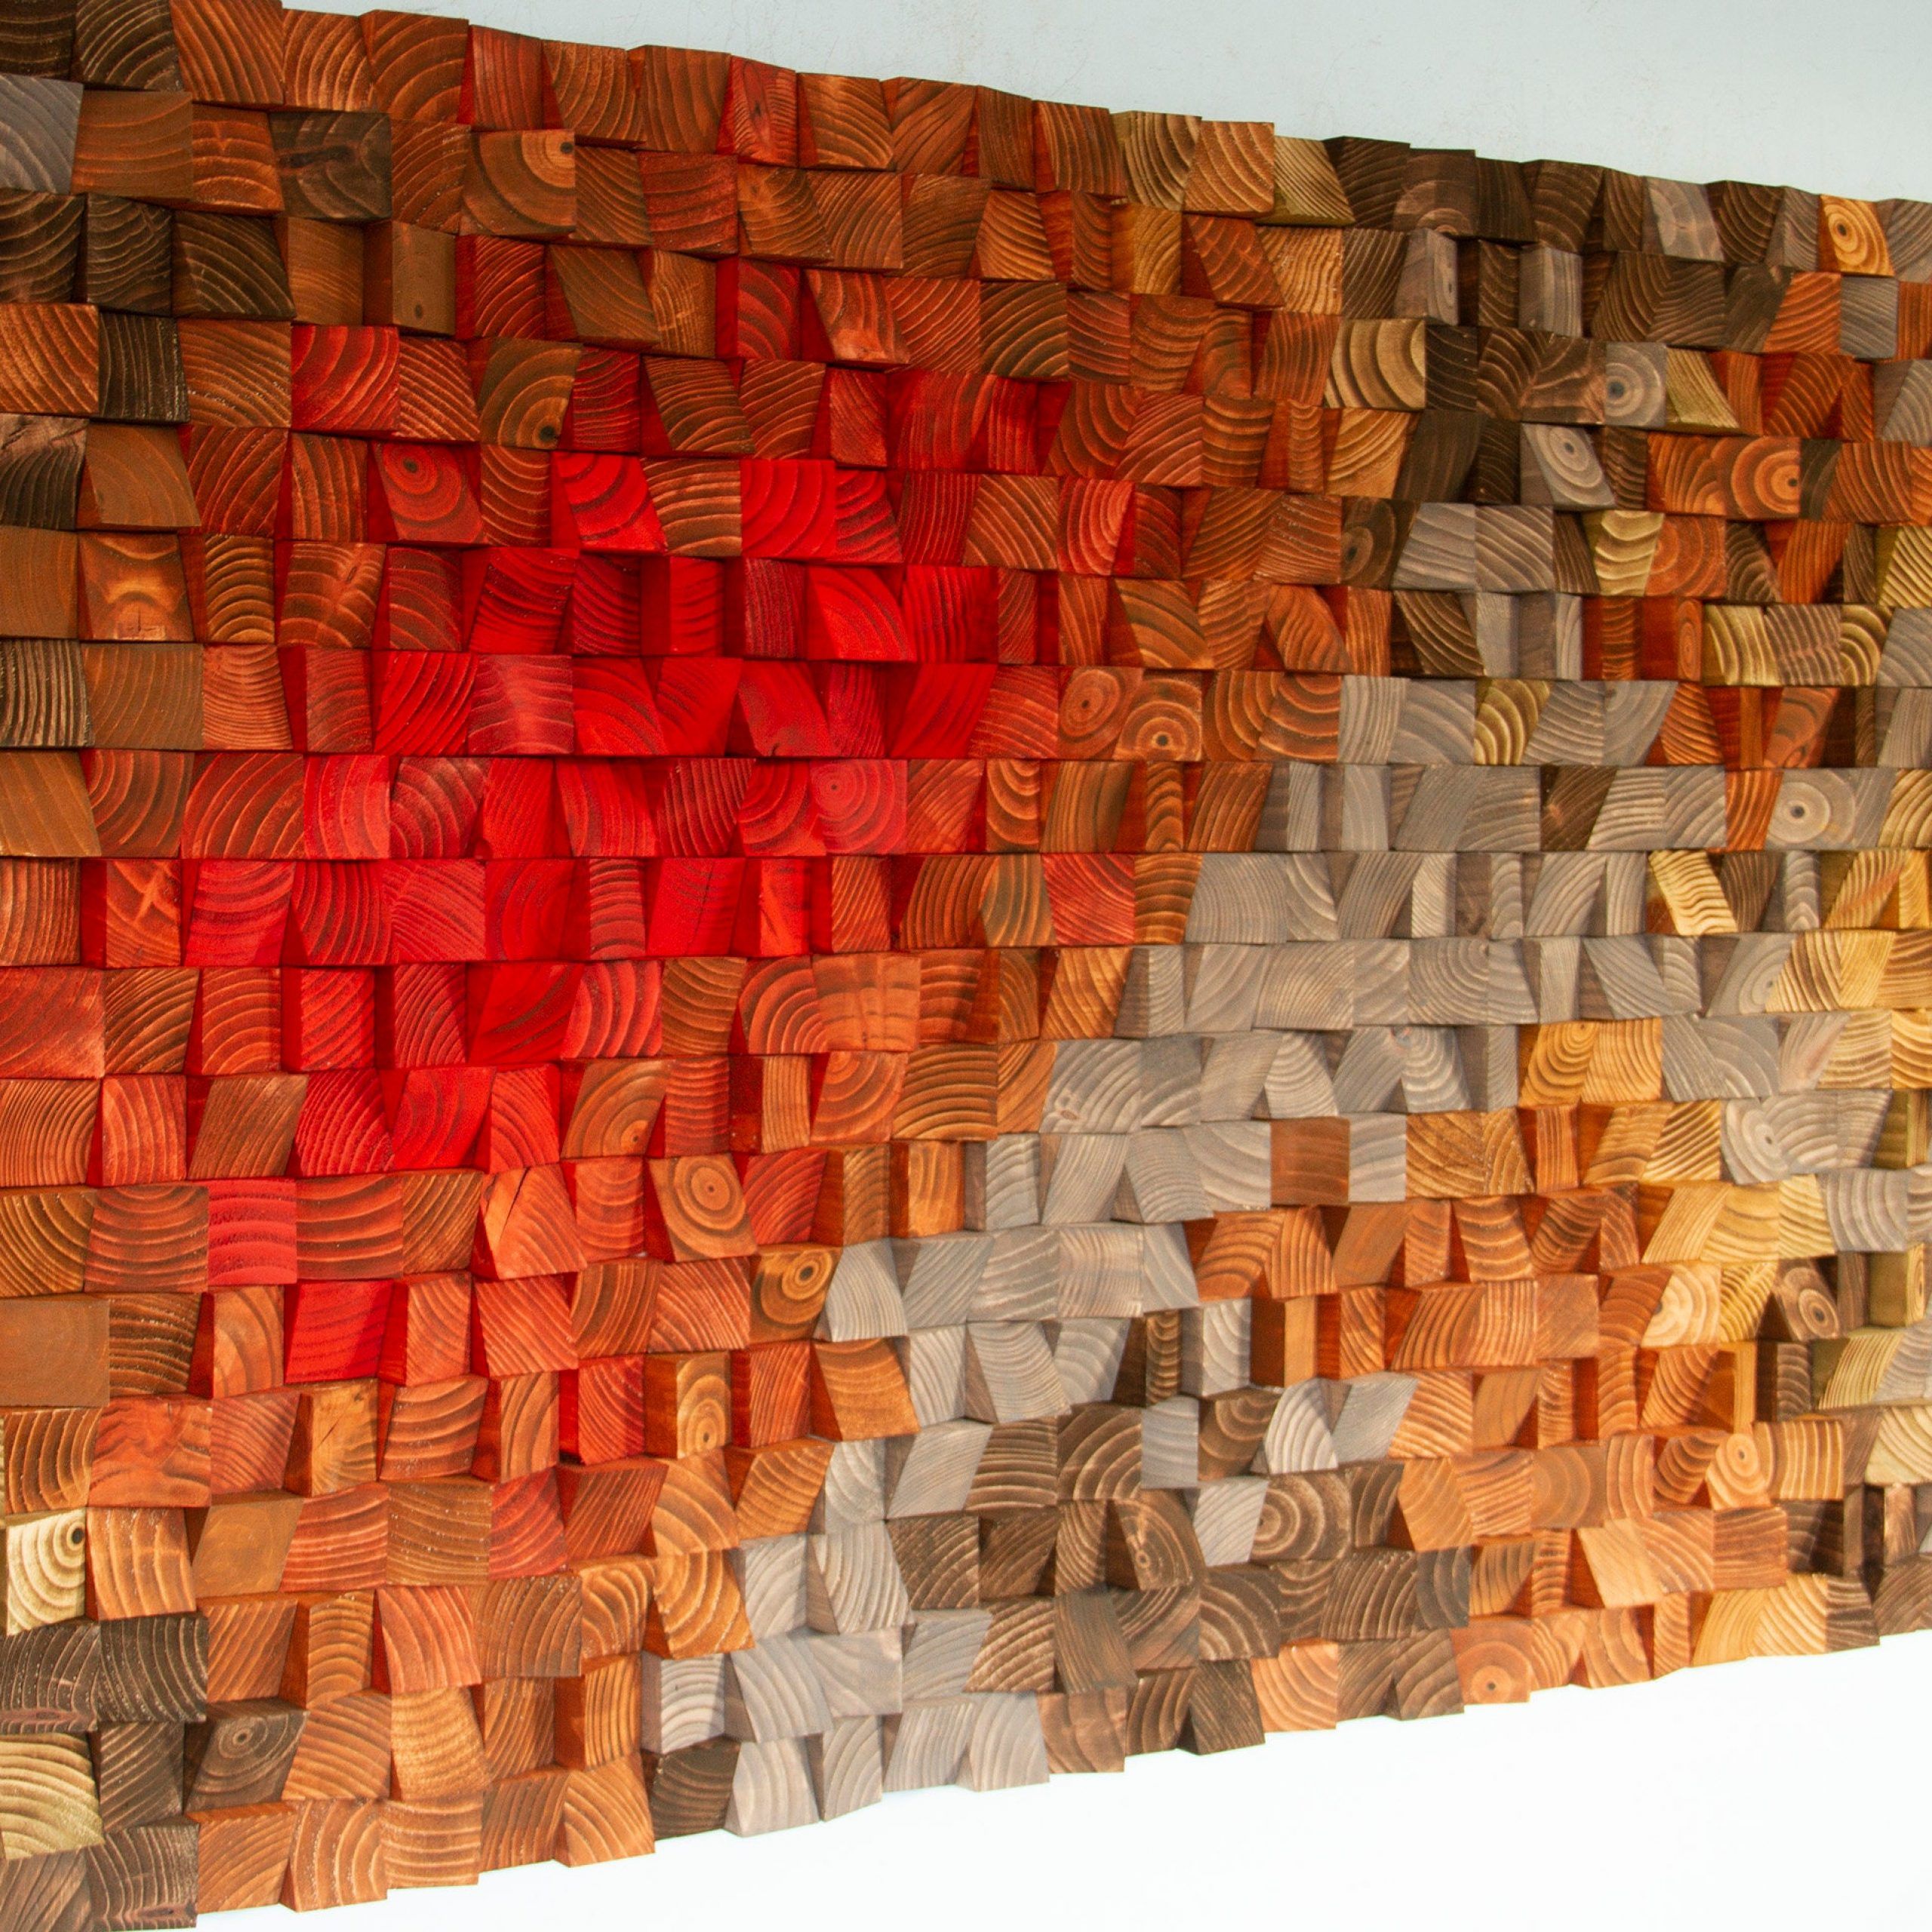 Rustic Wood Wall Art – Reclaimed Wood Art – 3d Wall Art Pertaining To Most Up To Date Abstract Flow Wood Wall Art (View 7 of 20)